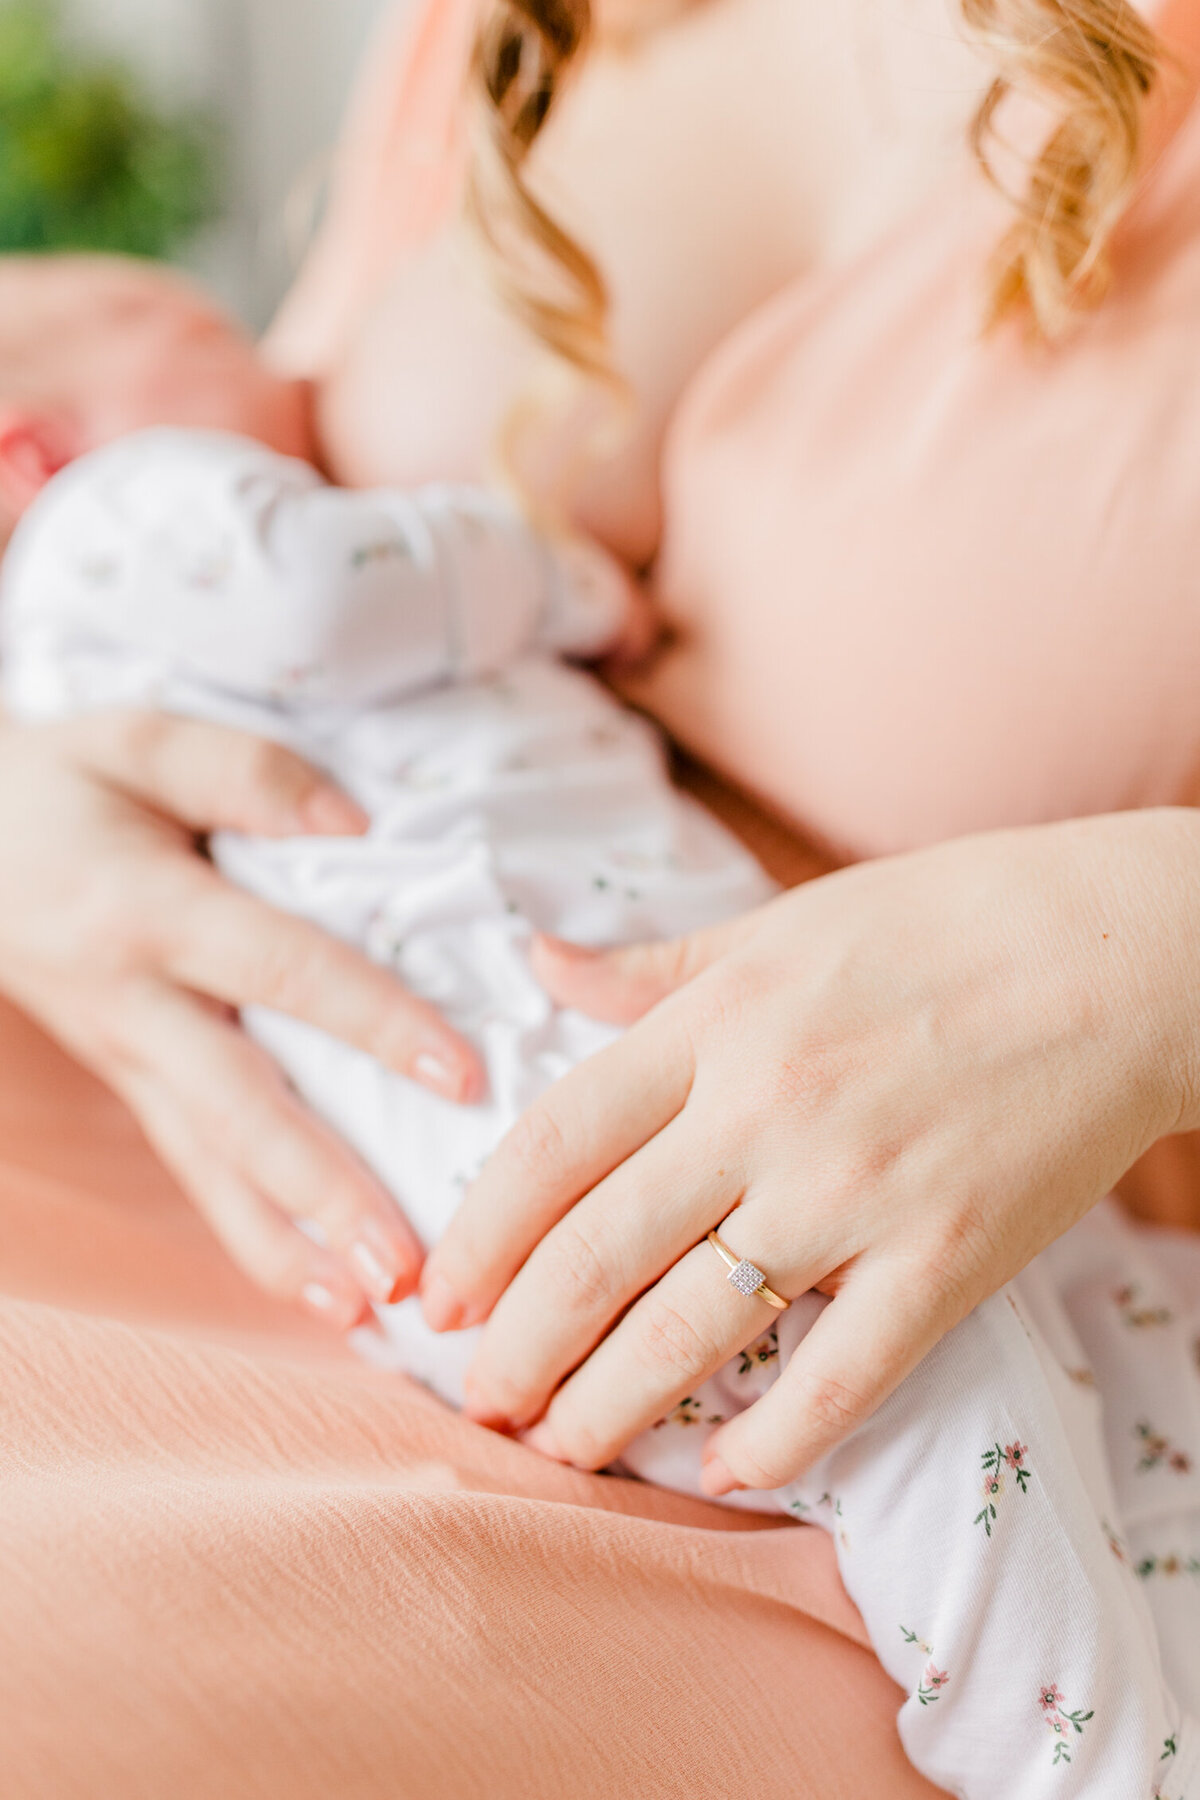 Focus of the image is on a mother's hand as she hold's her newborn in her lap to nurse